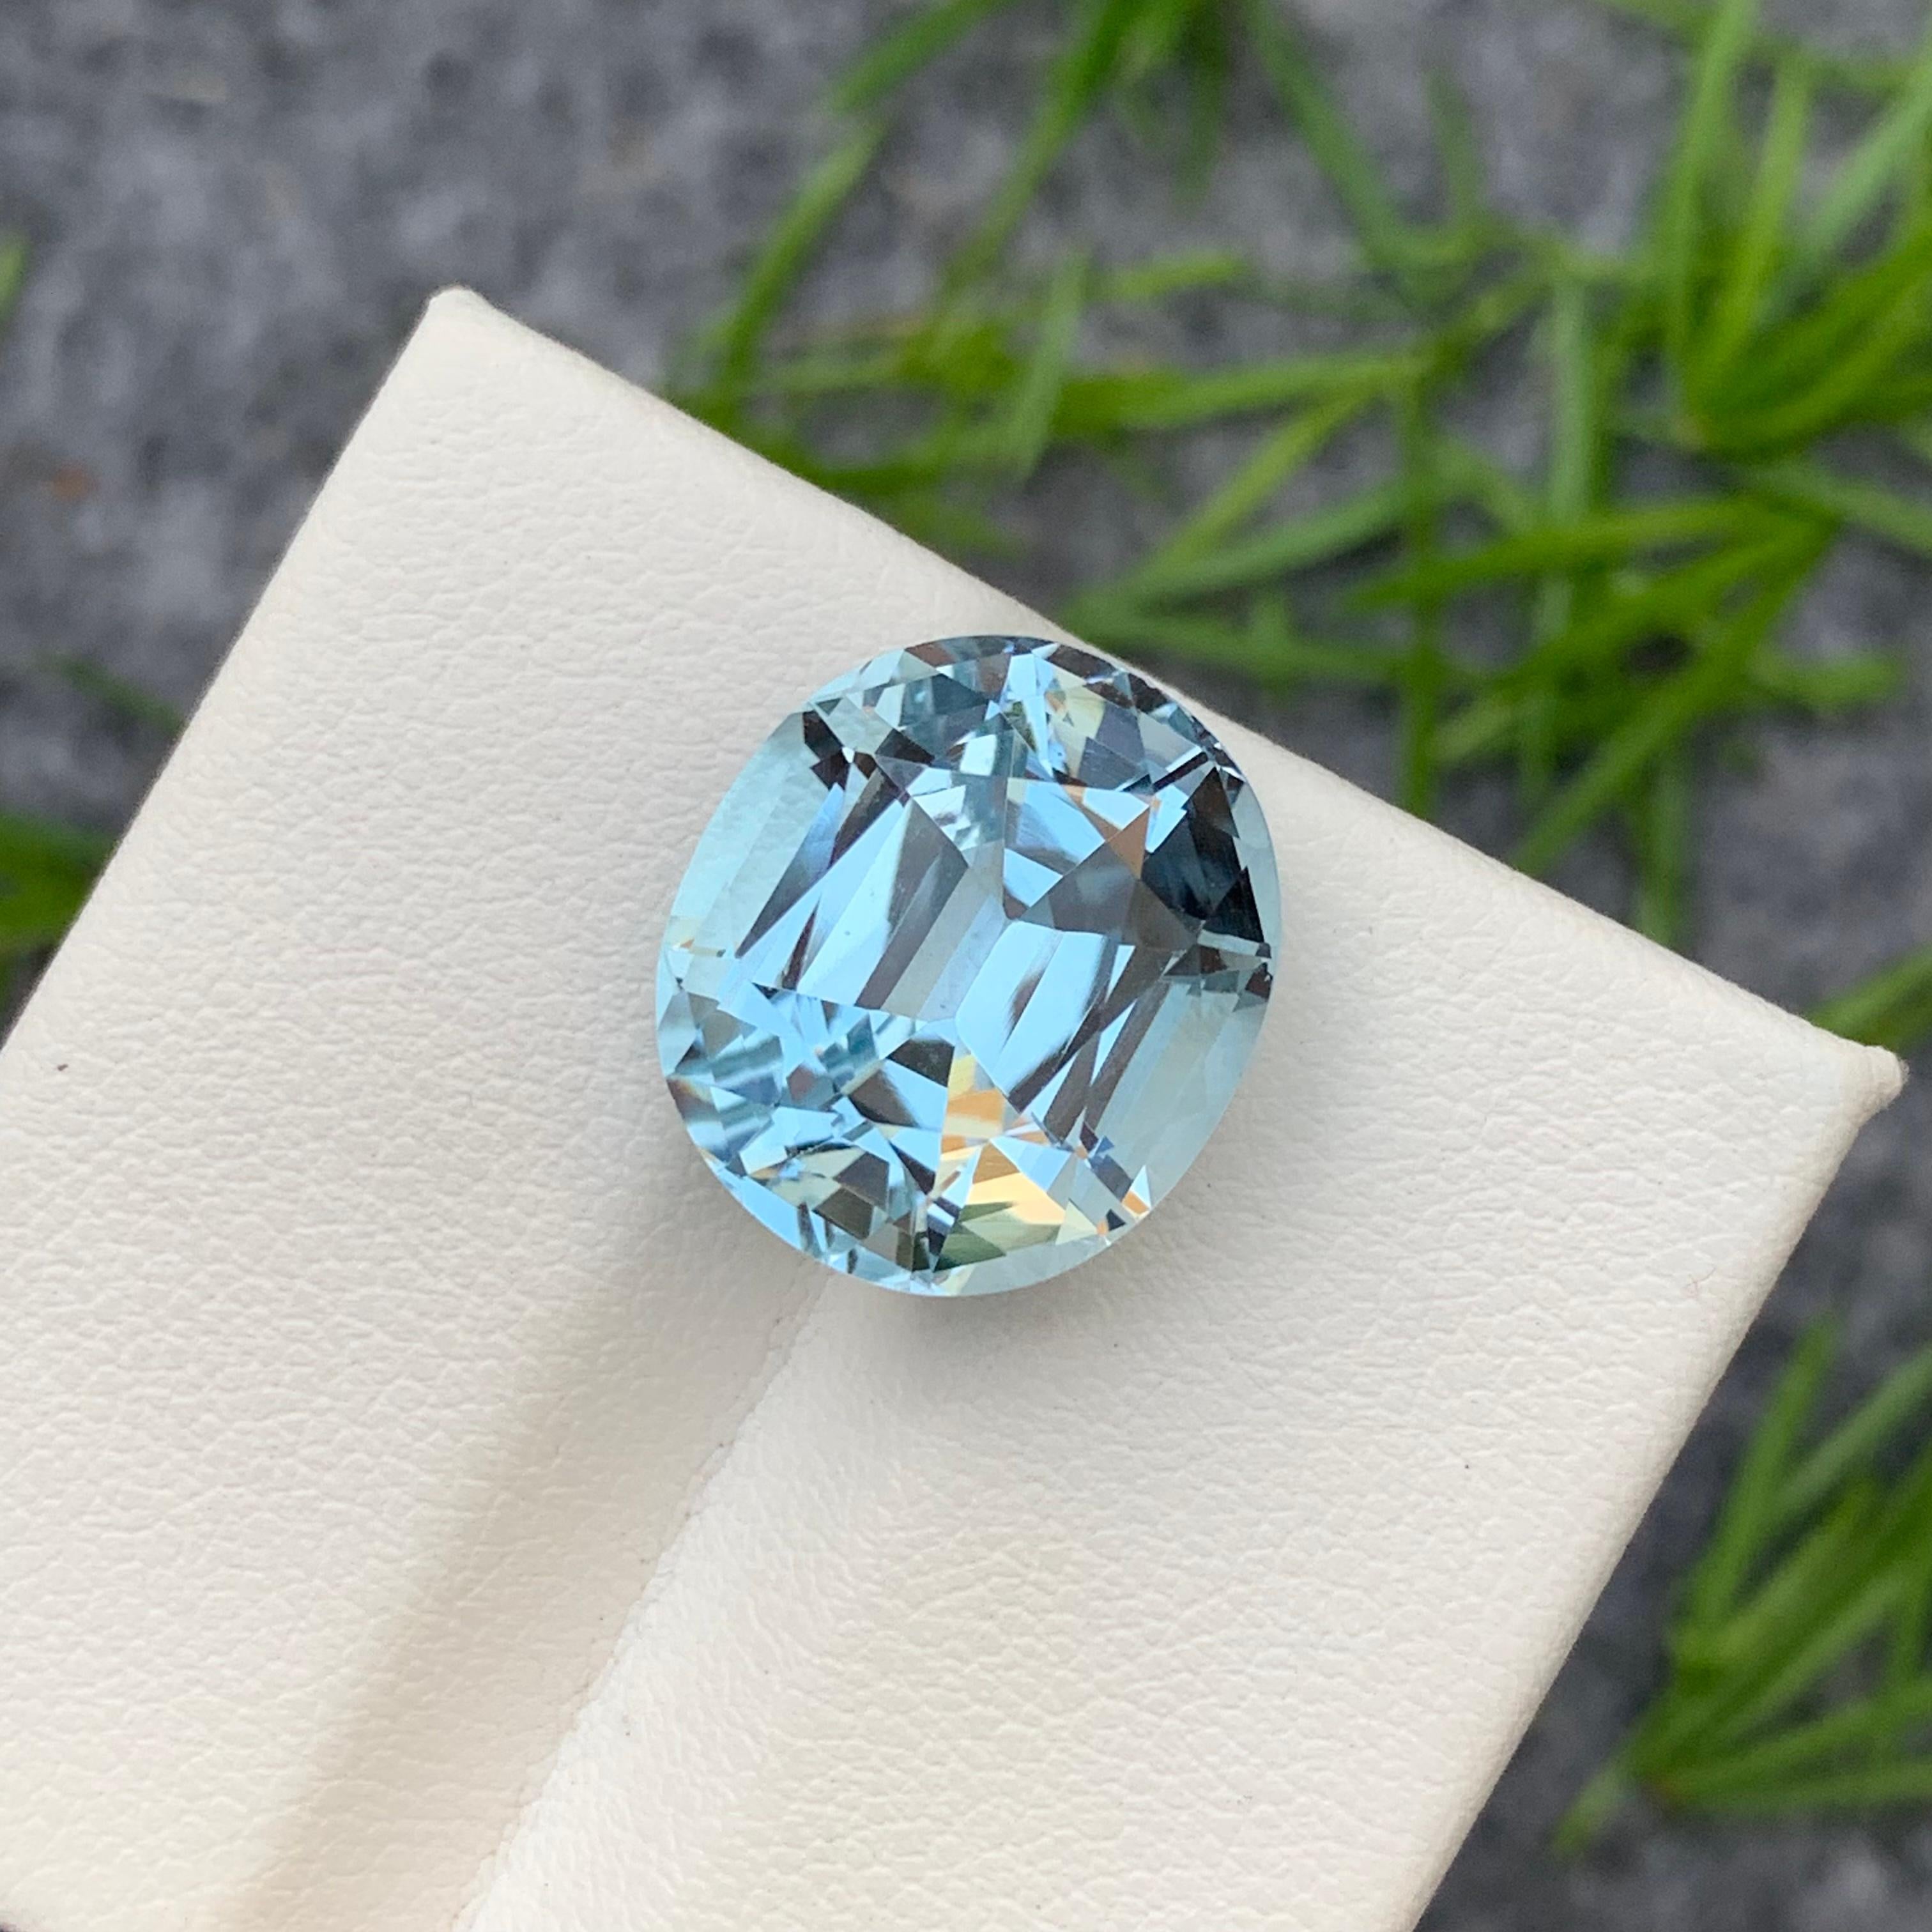 18.75 Carat Faceted Light Blue Topaz Cushion Cut Gemstone from Brazil Mine For Sale 5